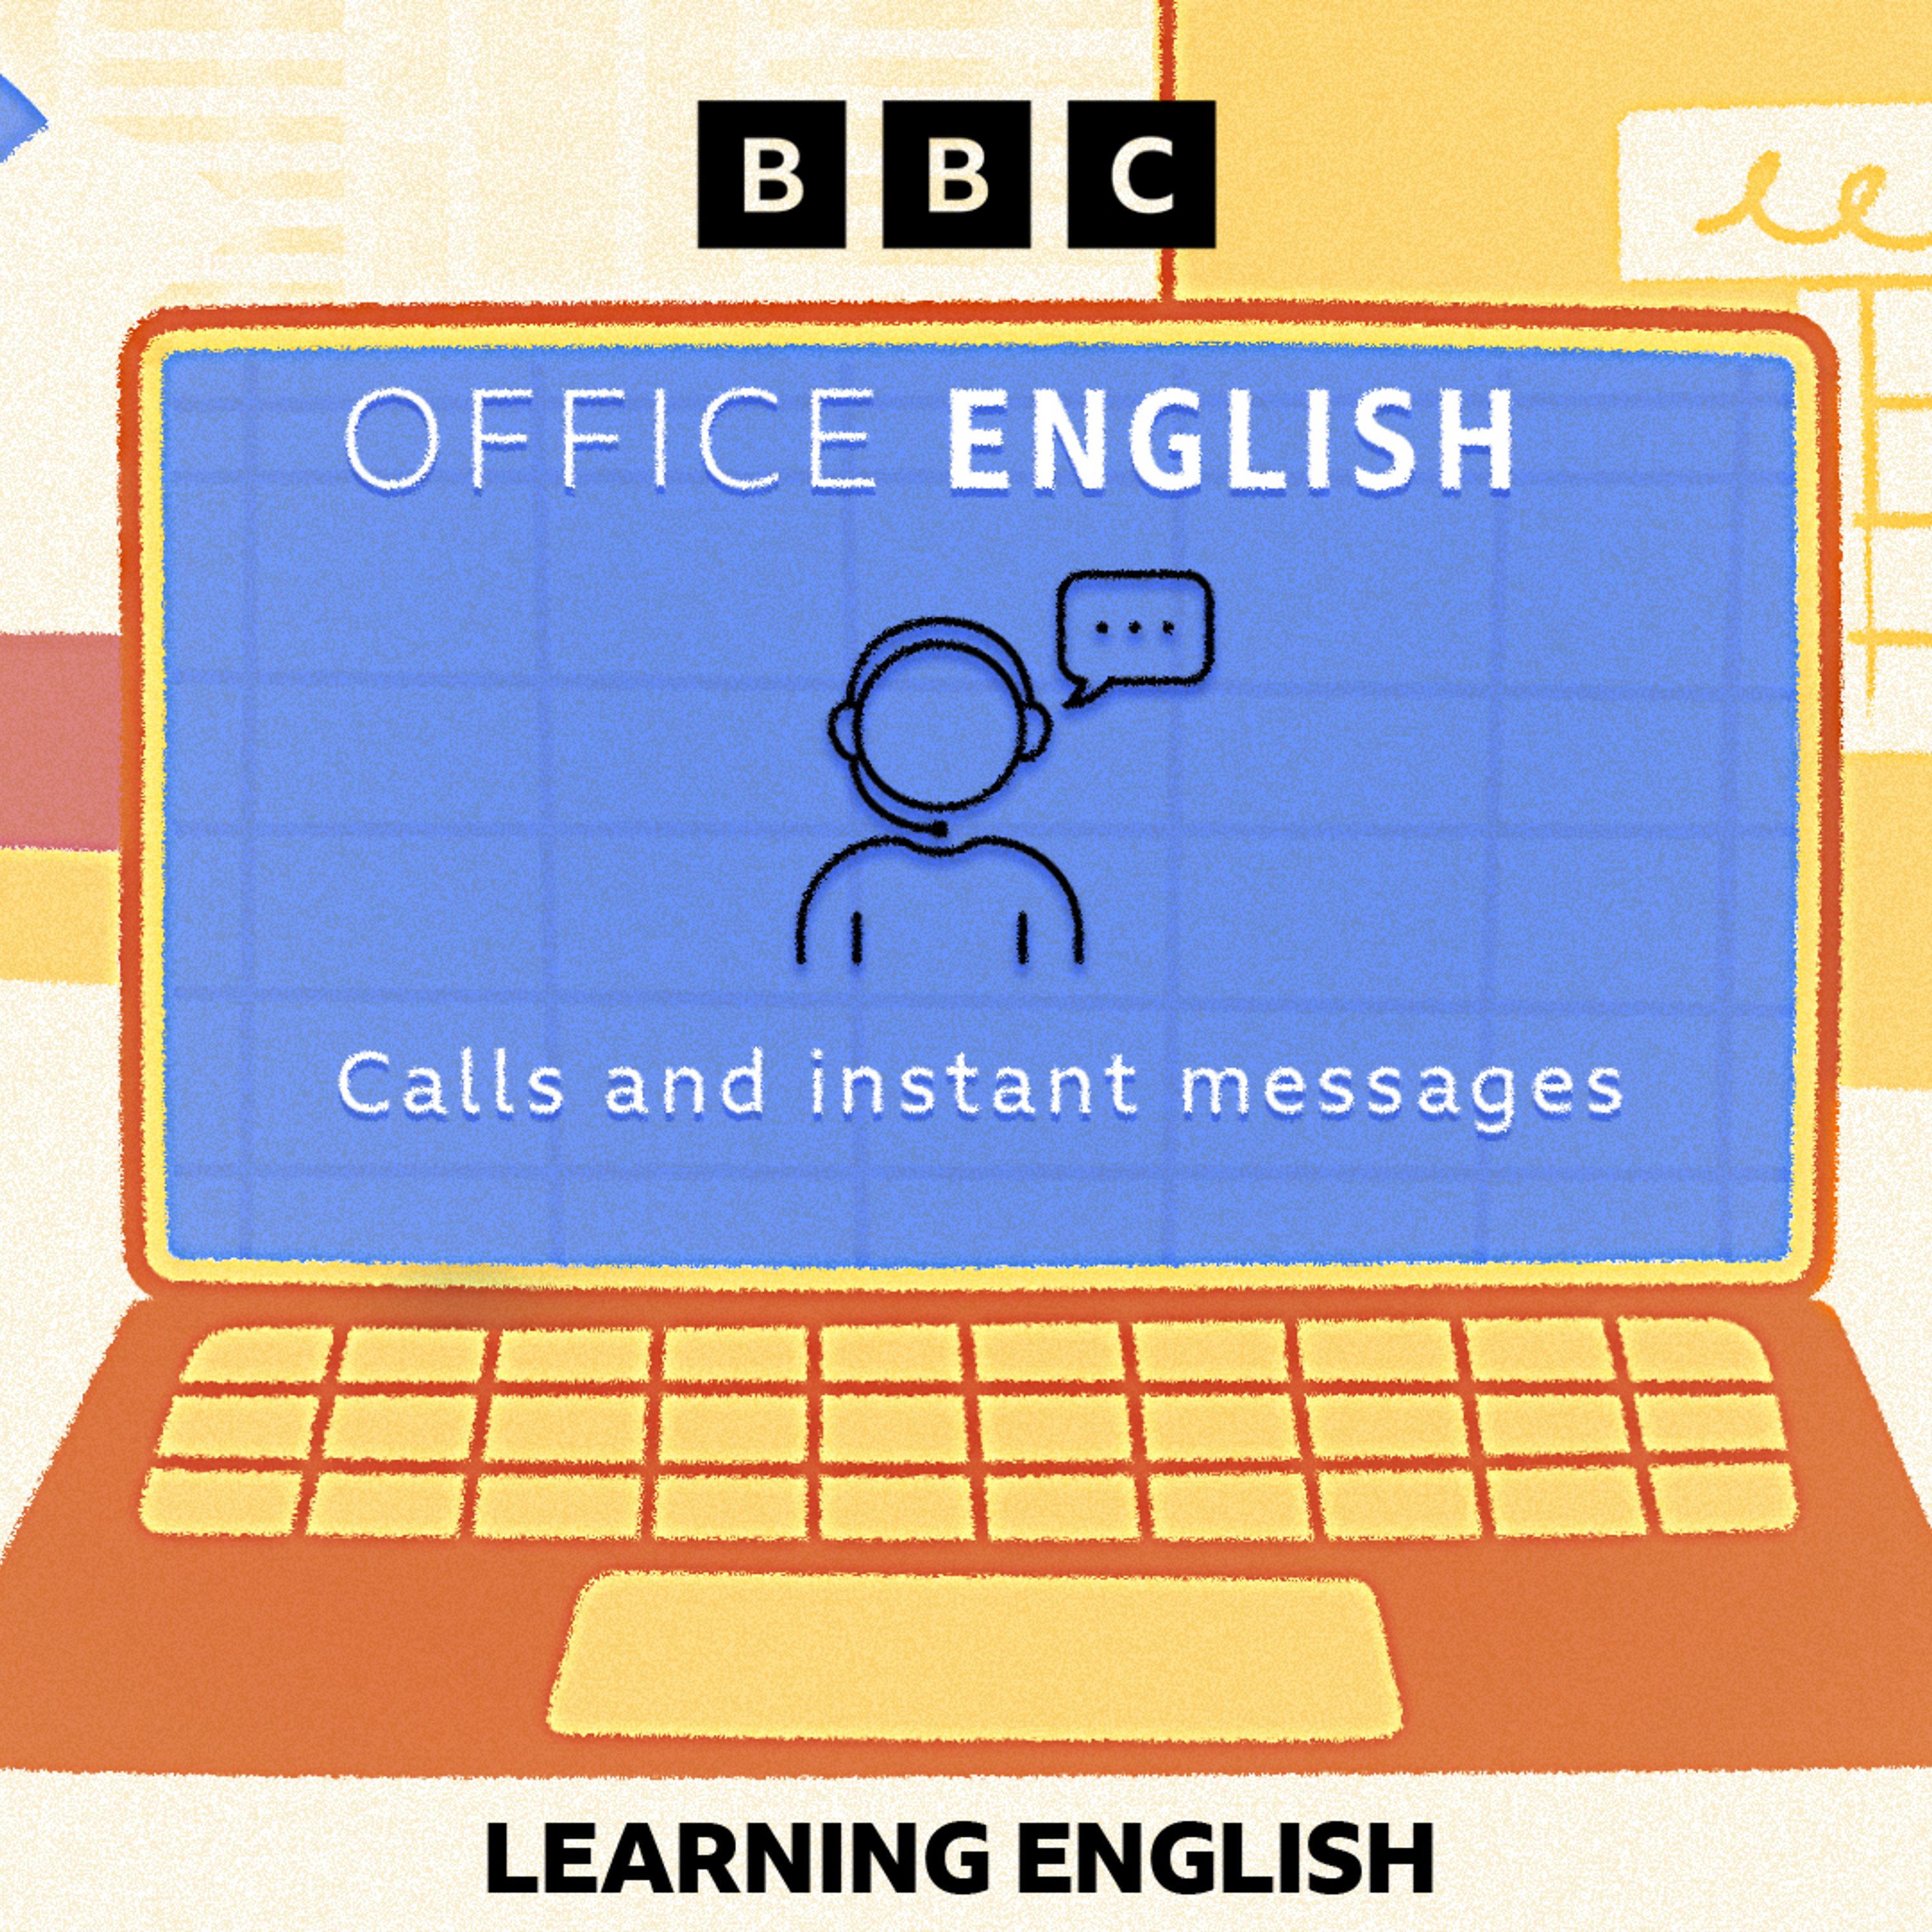 Office English: Calls and instant messages